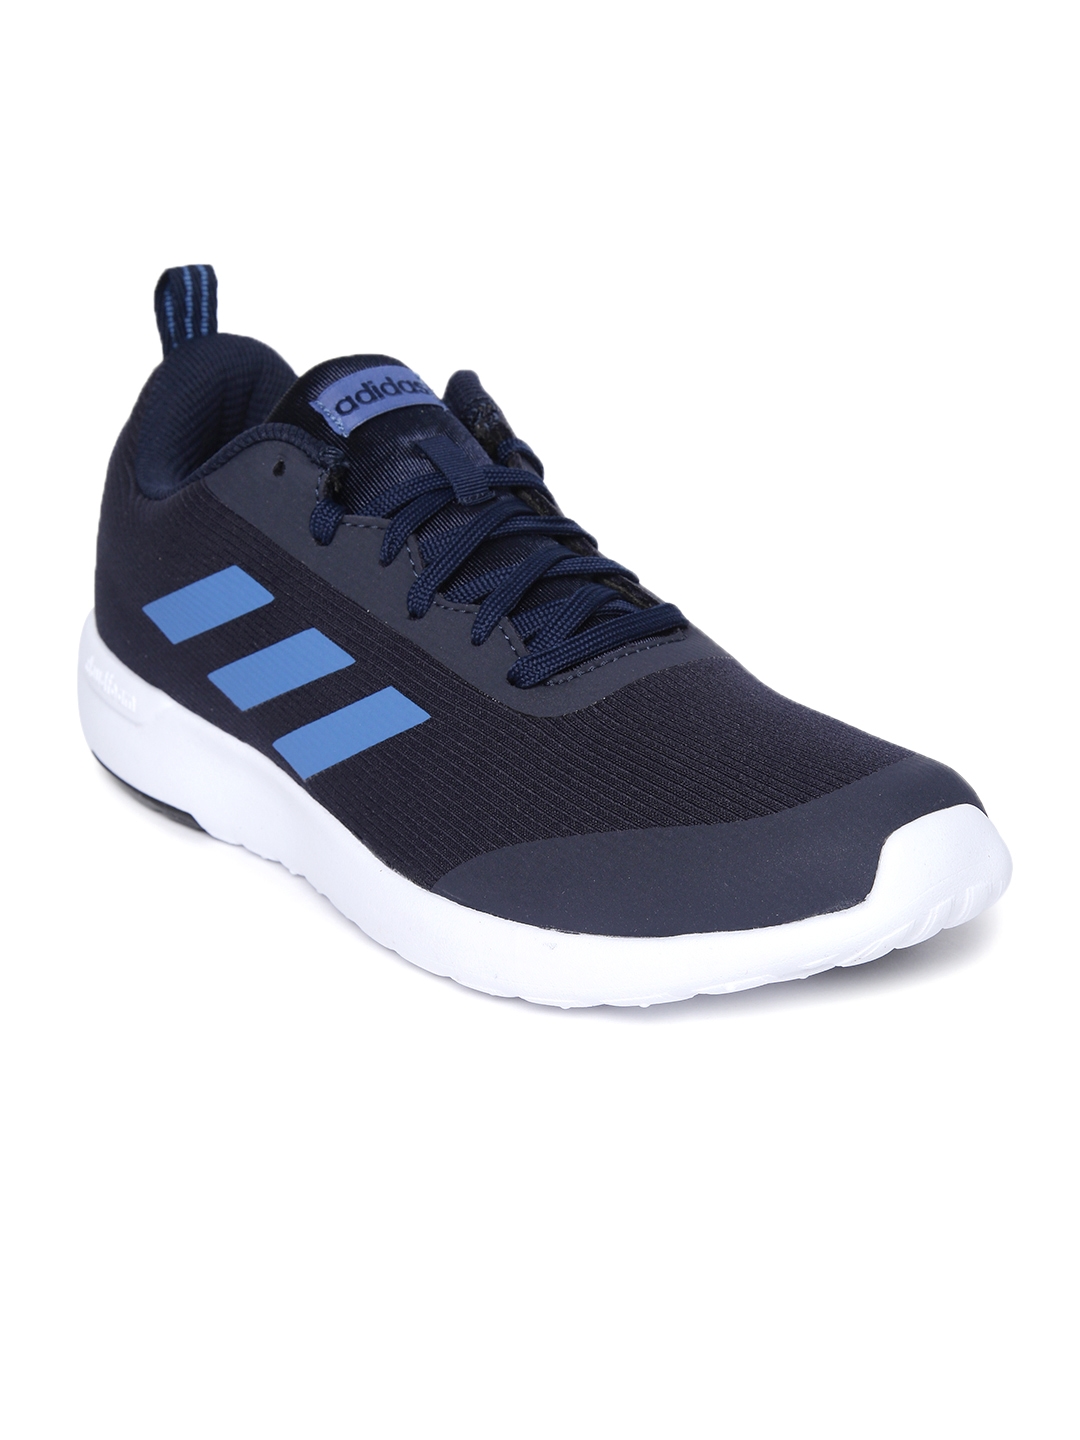 adidas bolter running shoes